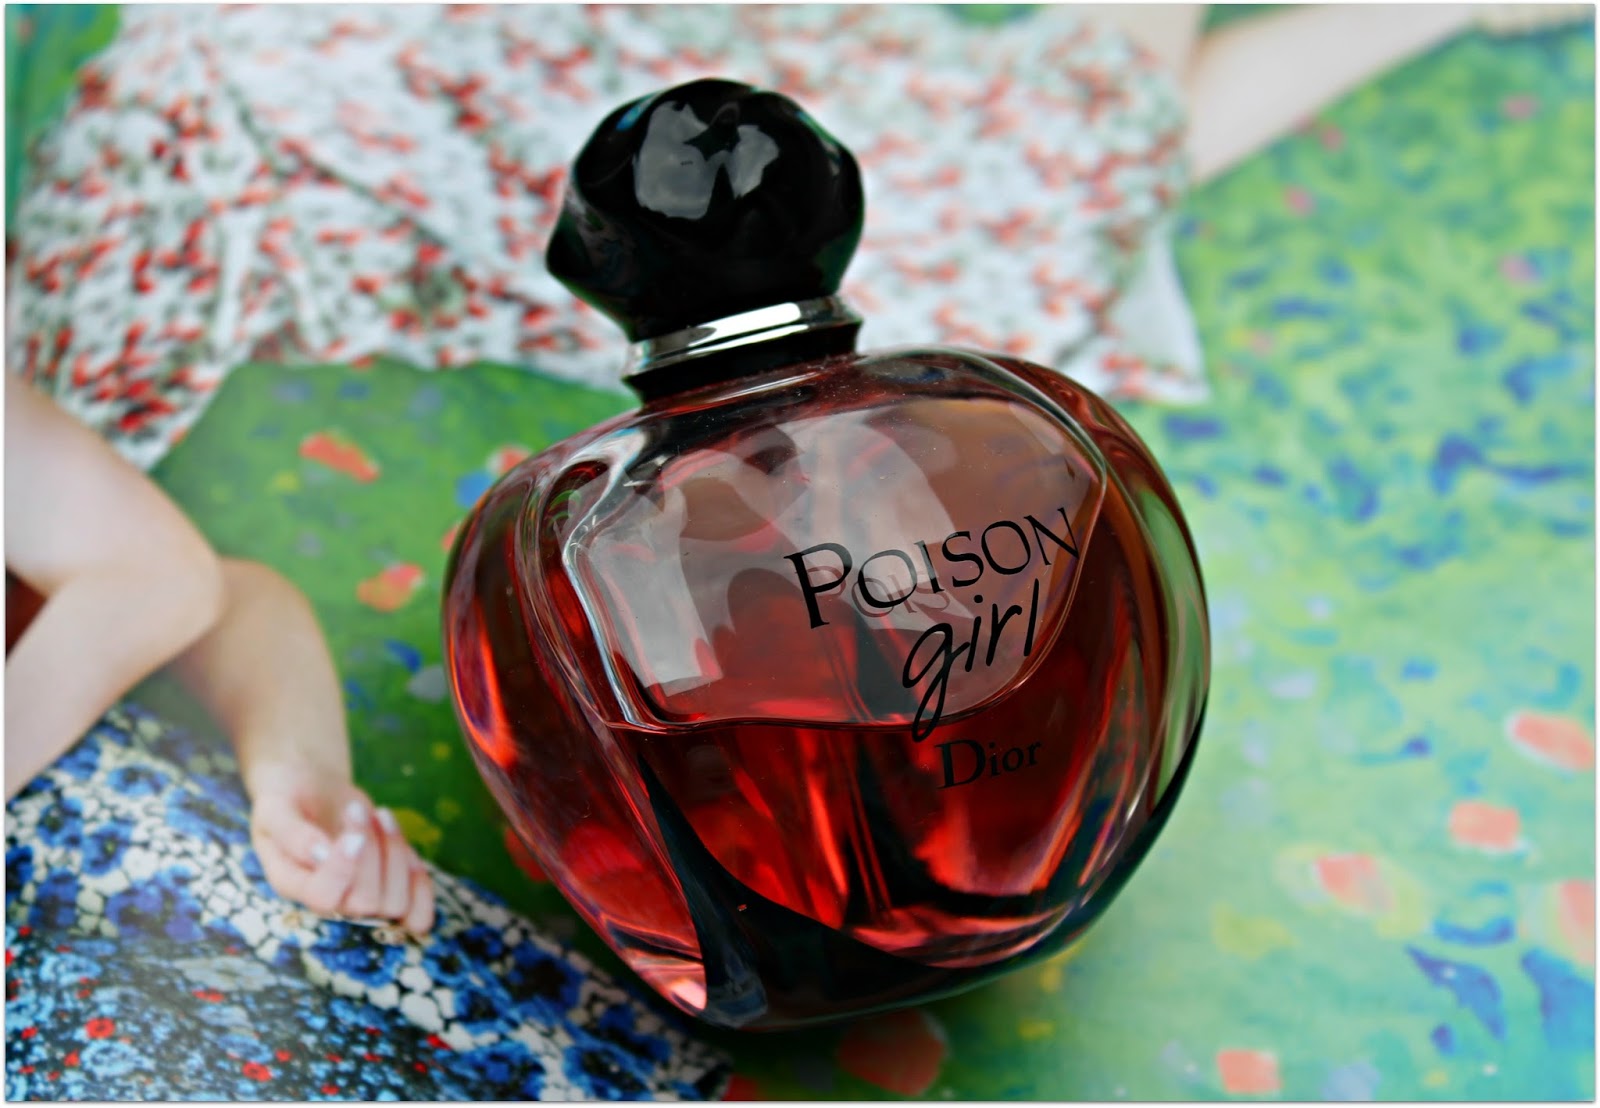 poison girl dior review